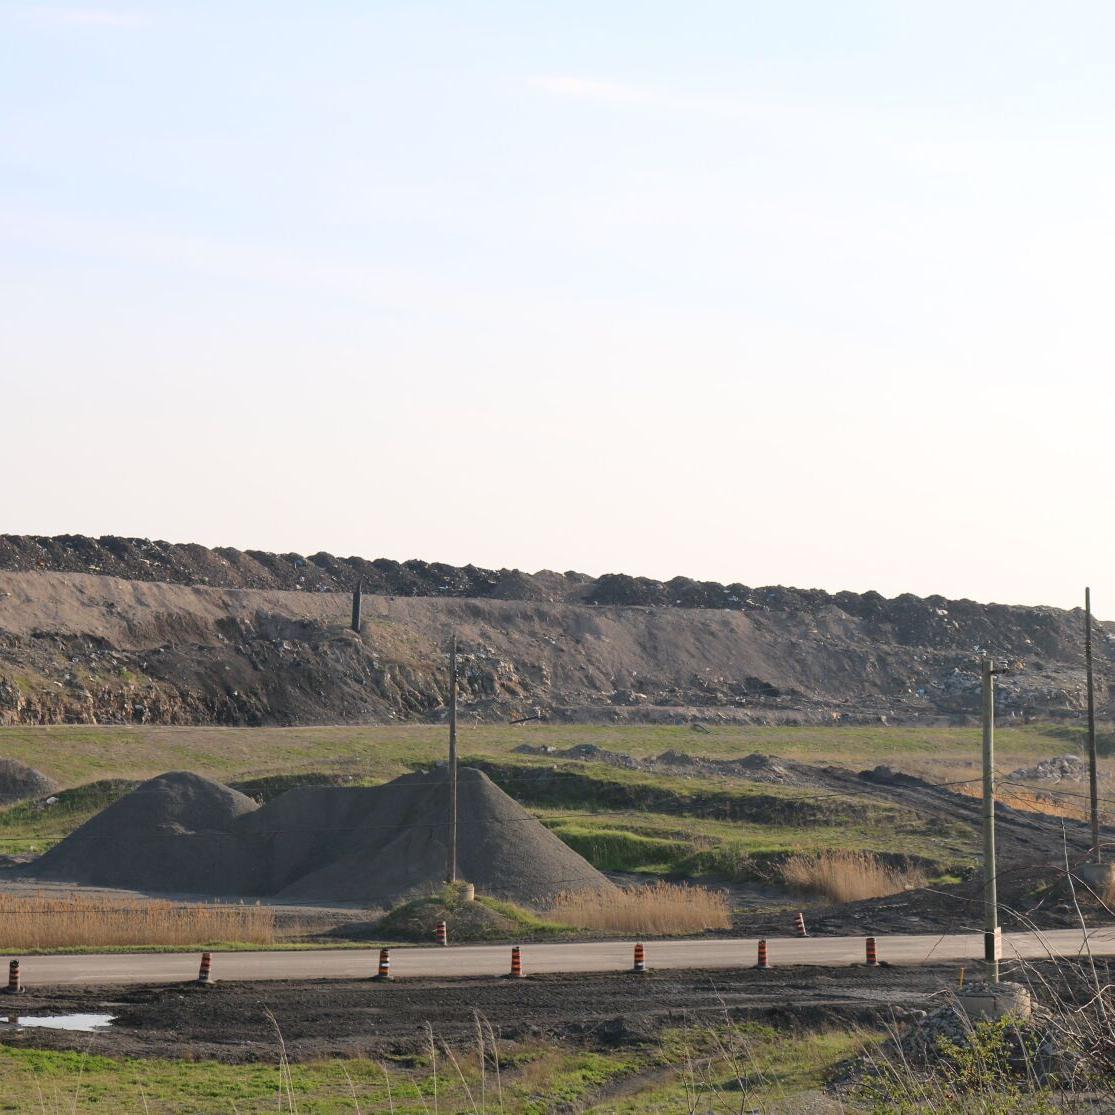 Stoney Creek private landfill approved for major expansion